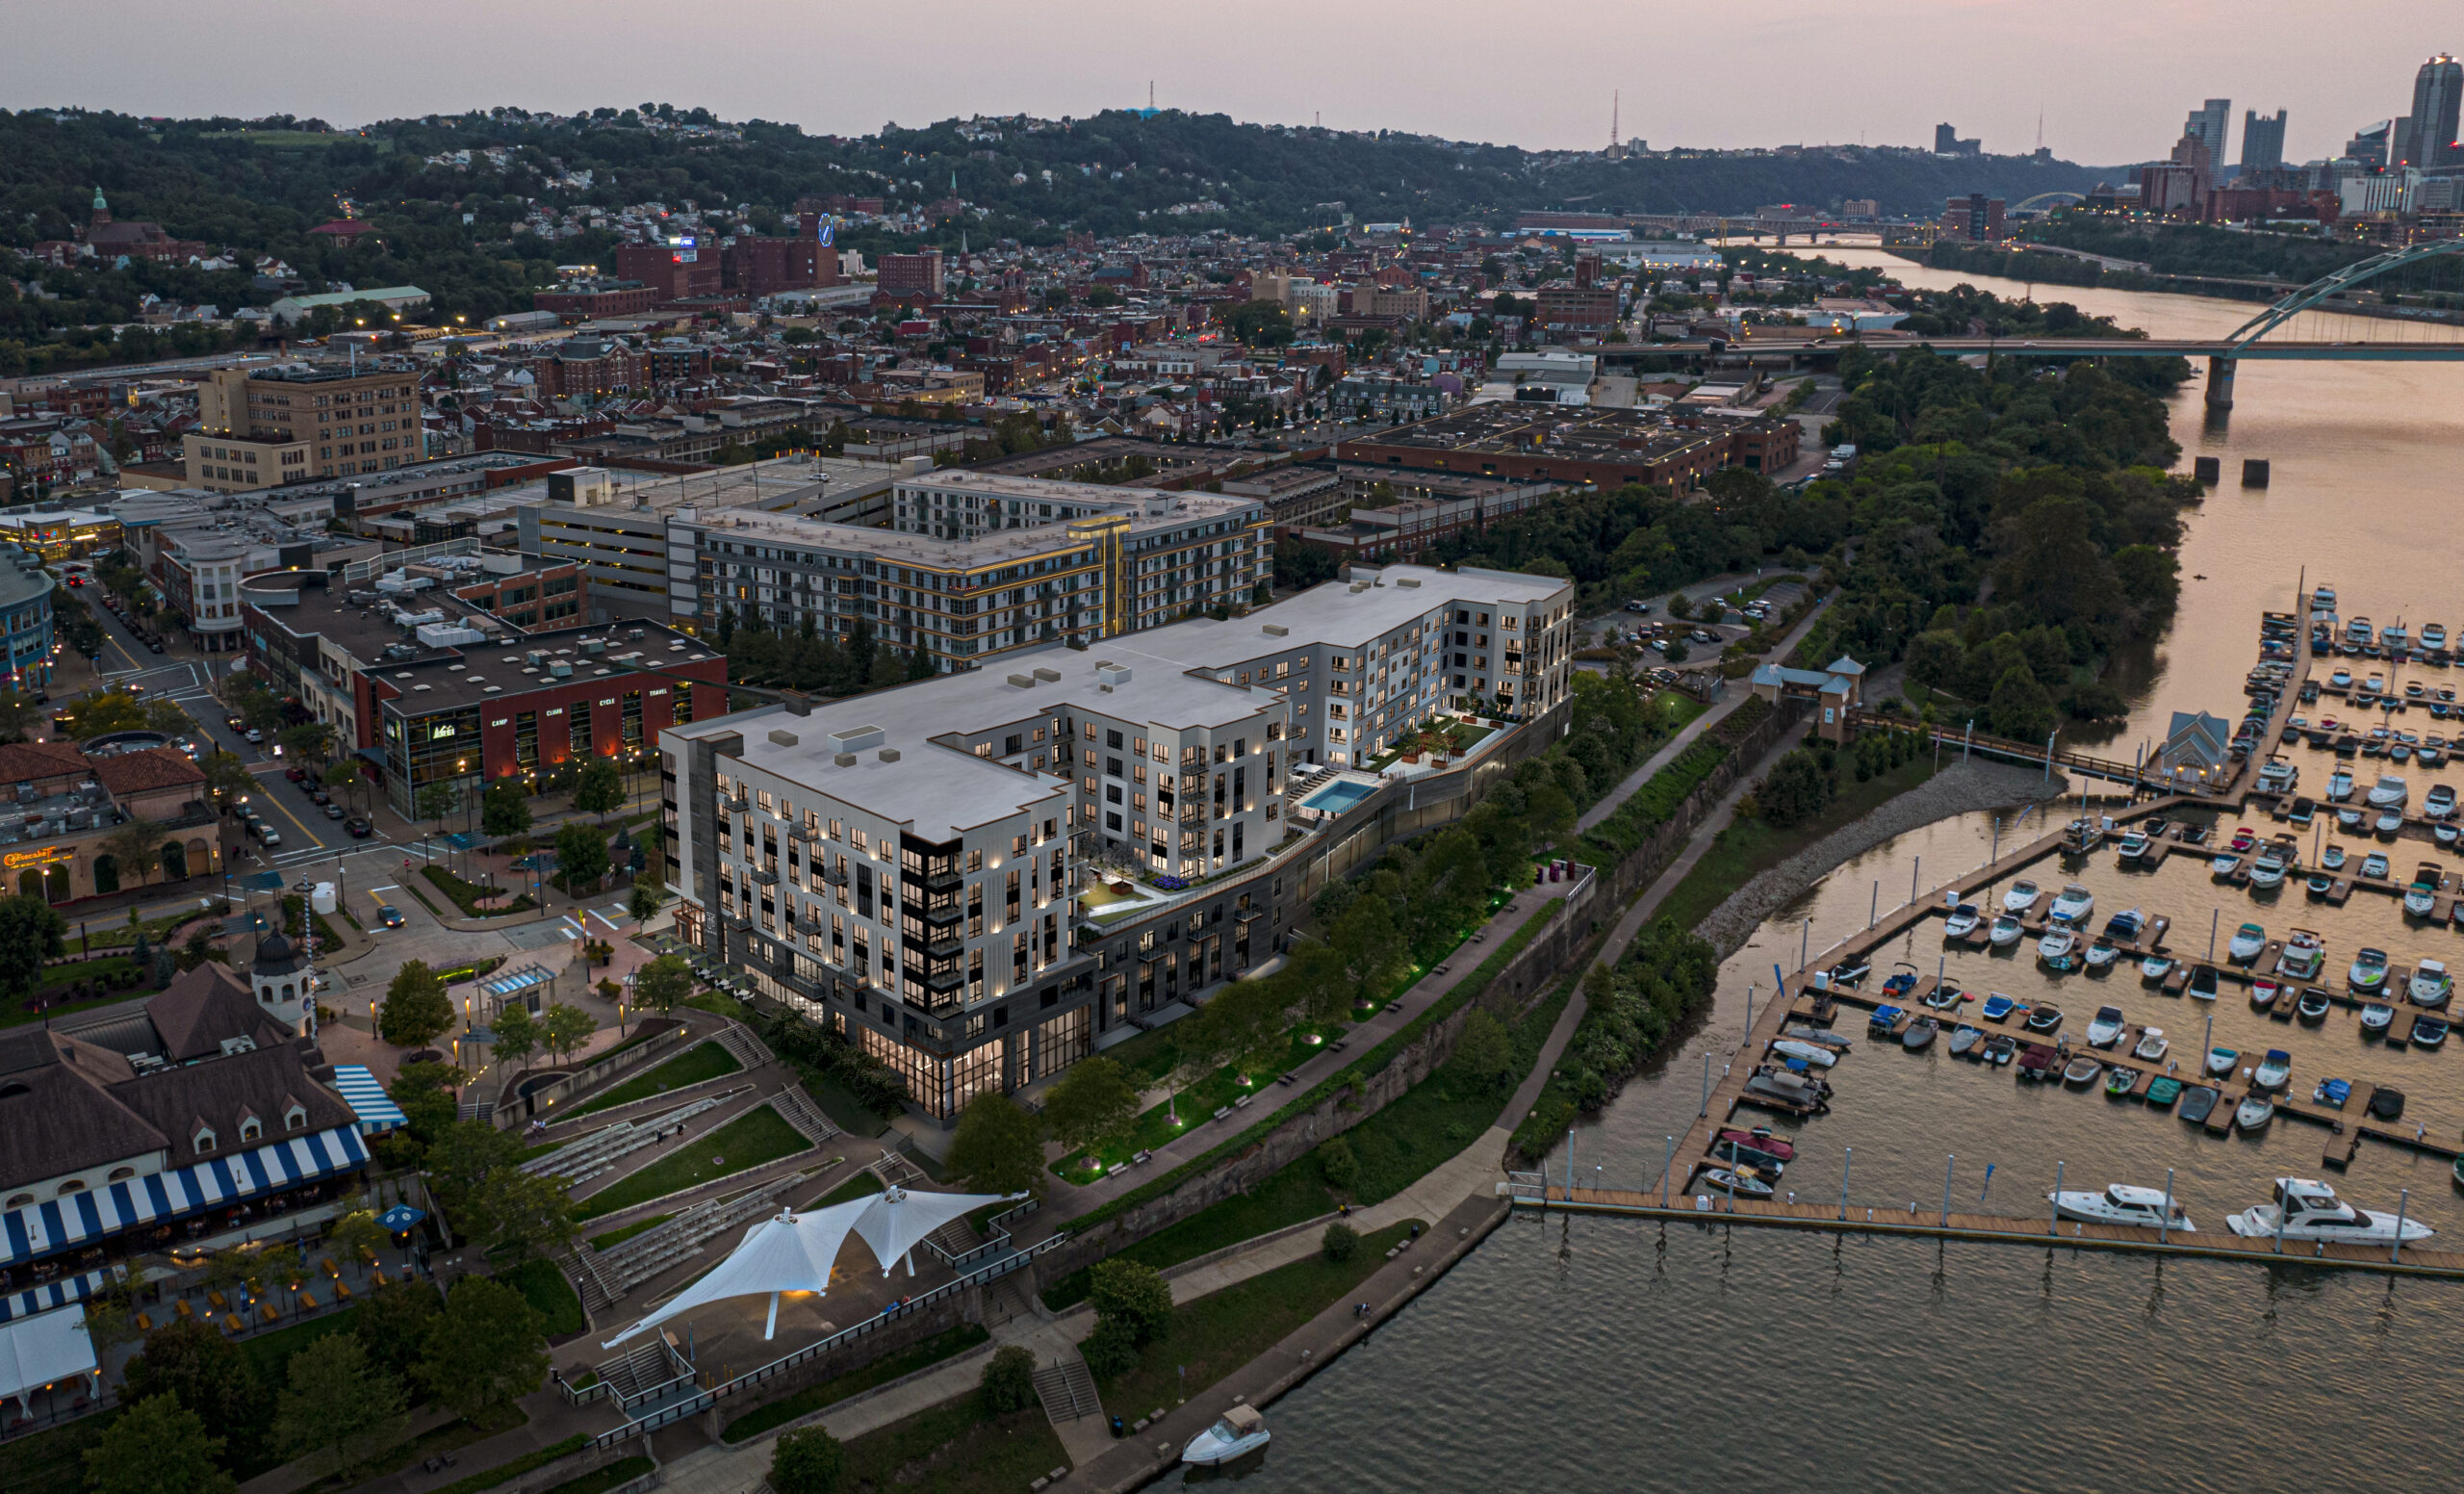 An eagle's eye view of the Park apartments at SouthSide Works along the South Shore of the river. South Side is in view on the left and downtown Pittsburgh is in the top right corner.